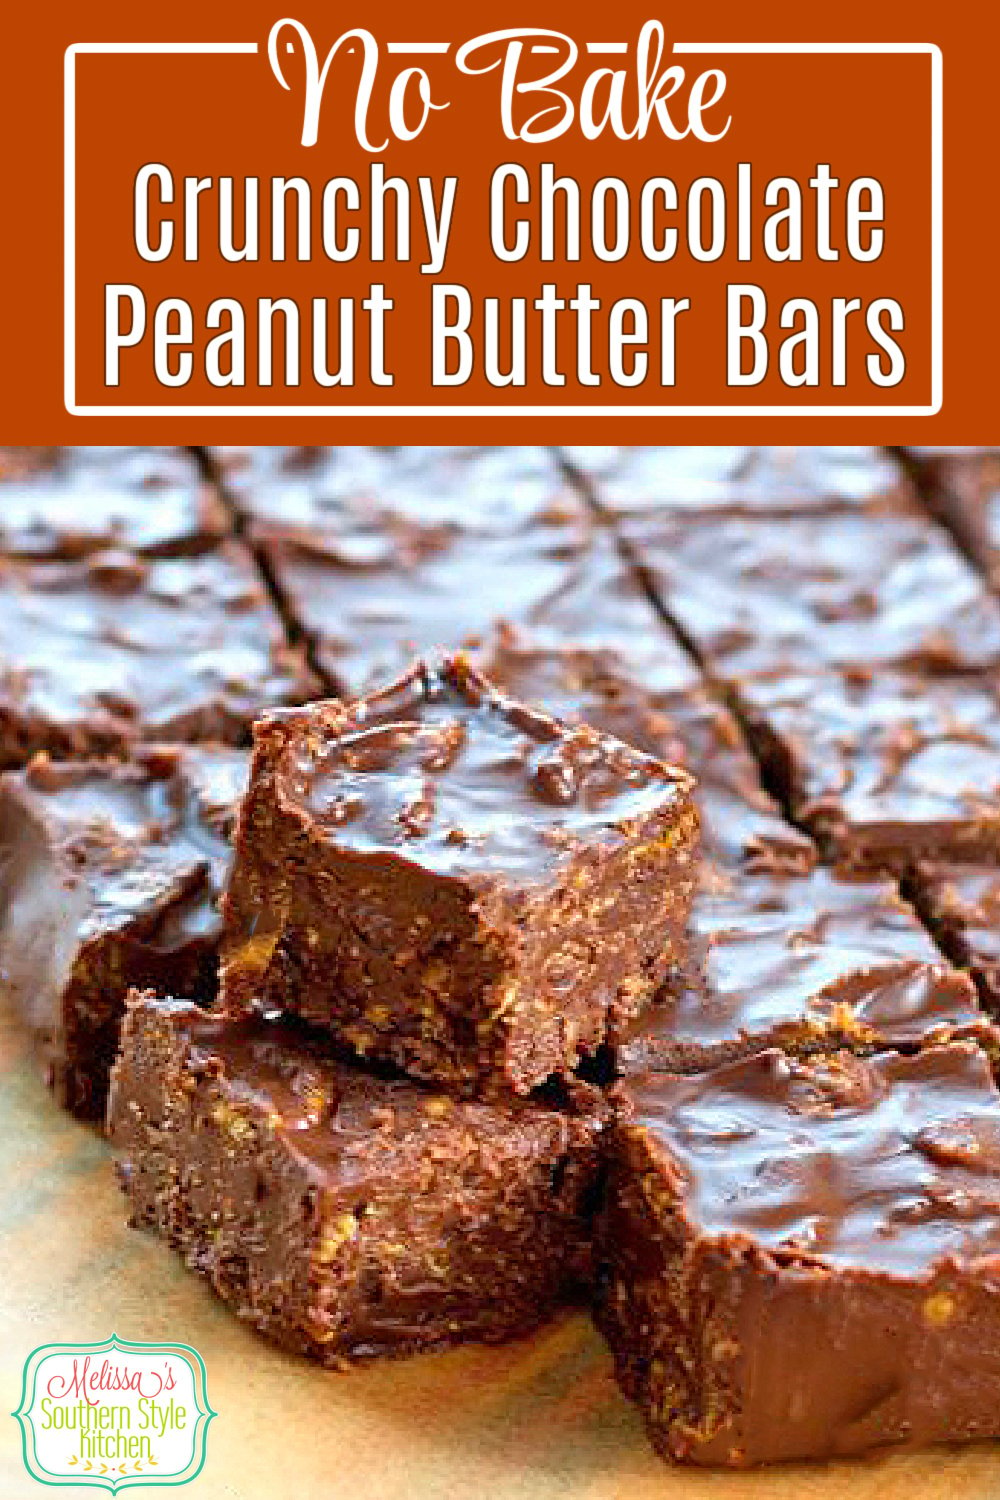 Satisfy your sweets craving with these crunchy No Bake Chocolate Peanut Butter Bars. #chocolatepeanutbutterbars #crunchbars #candyrecipes #peanutbutter #nobakedesserts #nobakebars #holidayrecipes #christmascandy #peanutbutter via @melissasssk